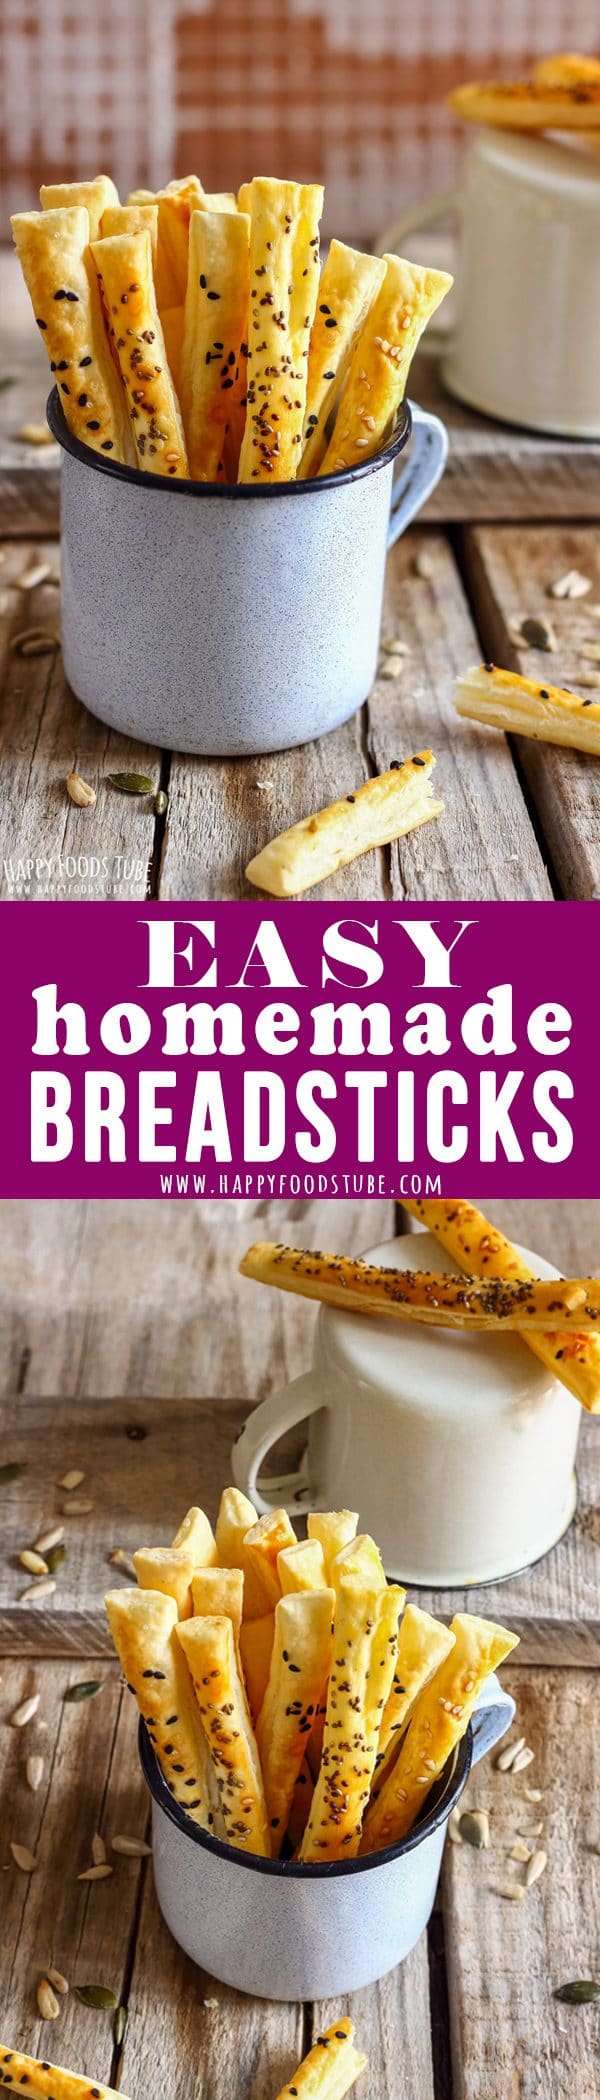 Easy Homemade Breadsticks Picture Collage